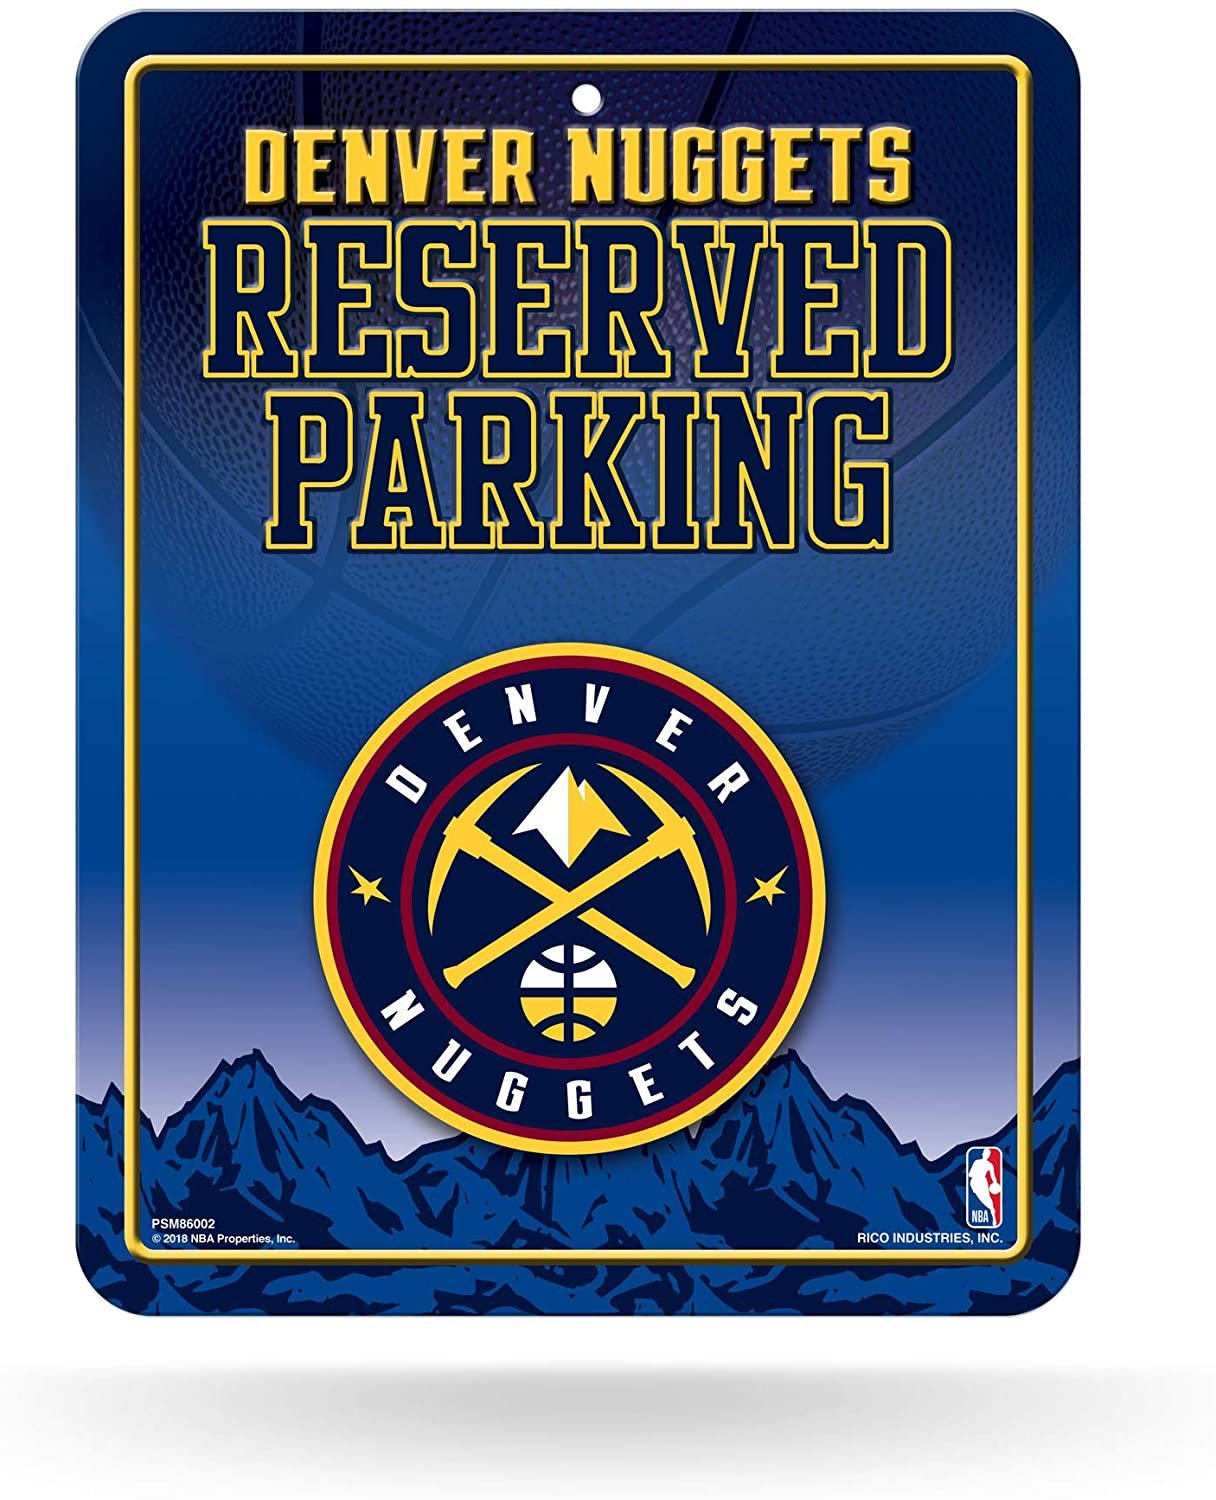 Denver Nuggets 8.5-Inch by 11-Inch Metal Parking Sign Décor